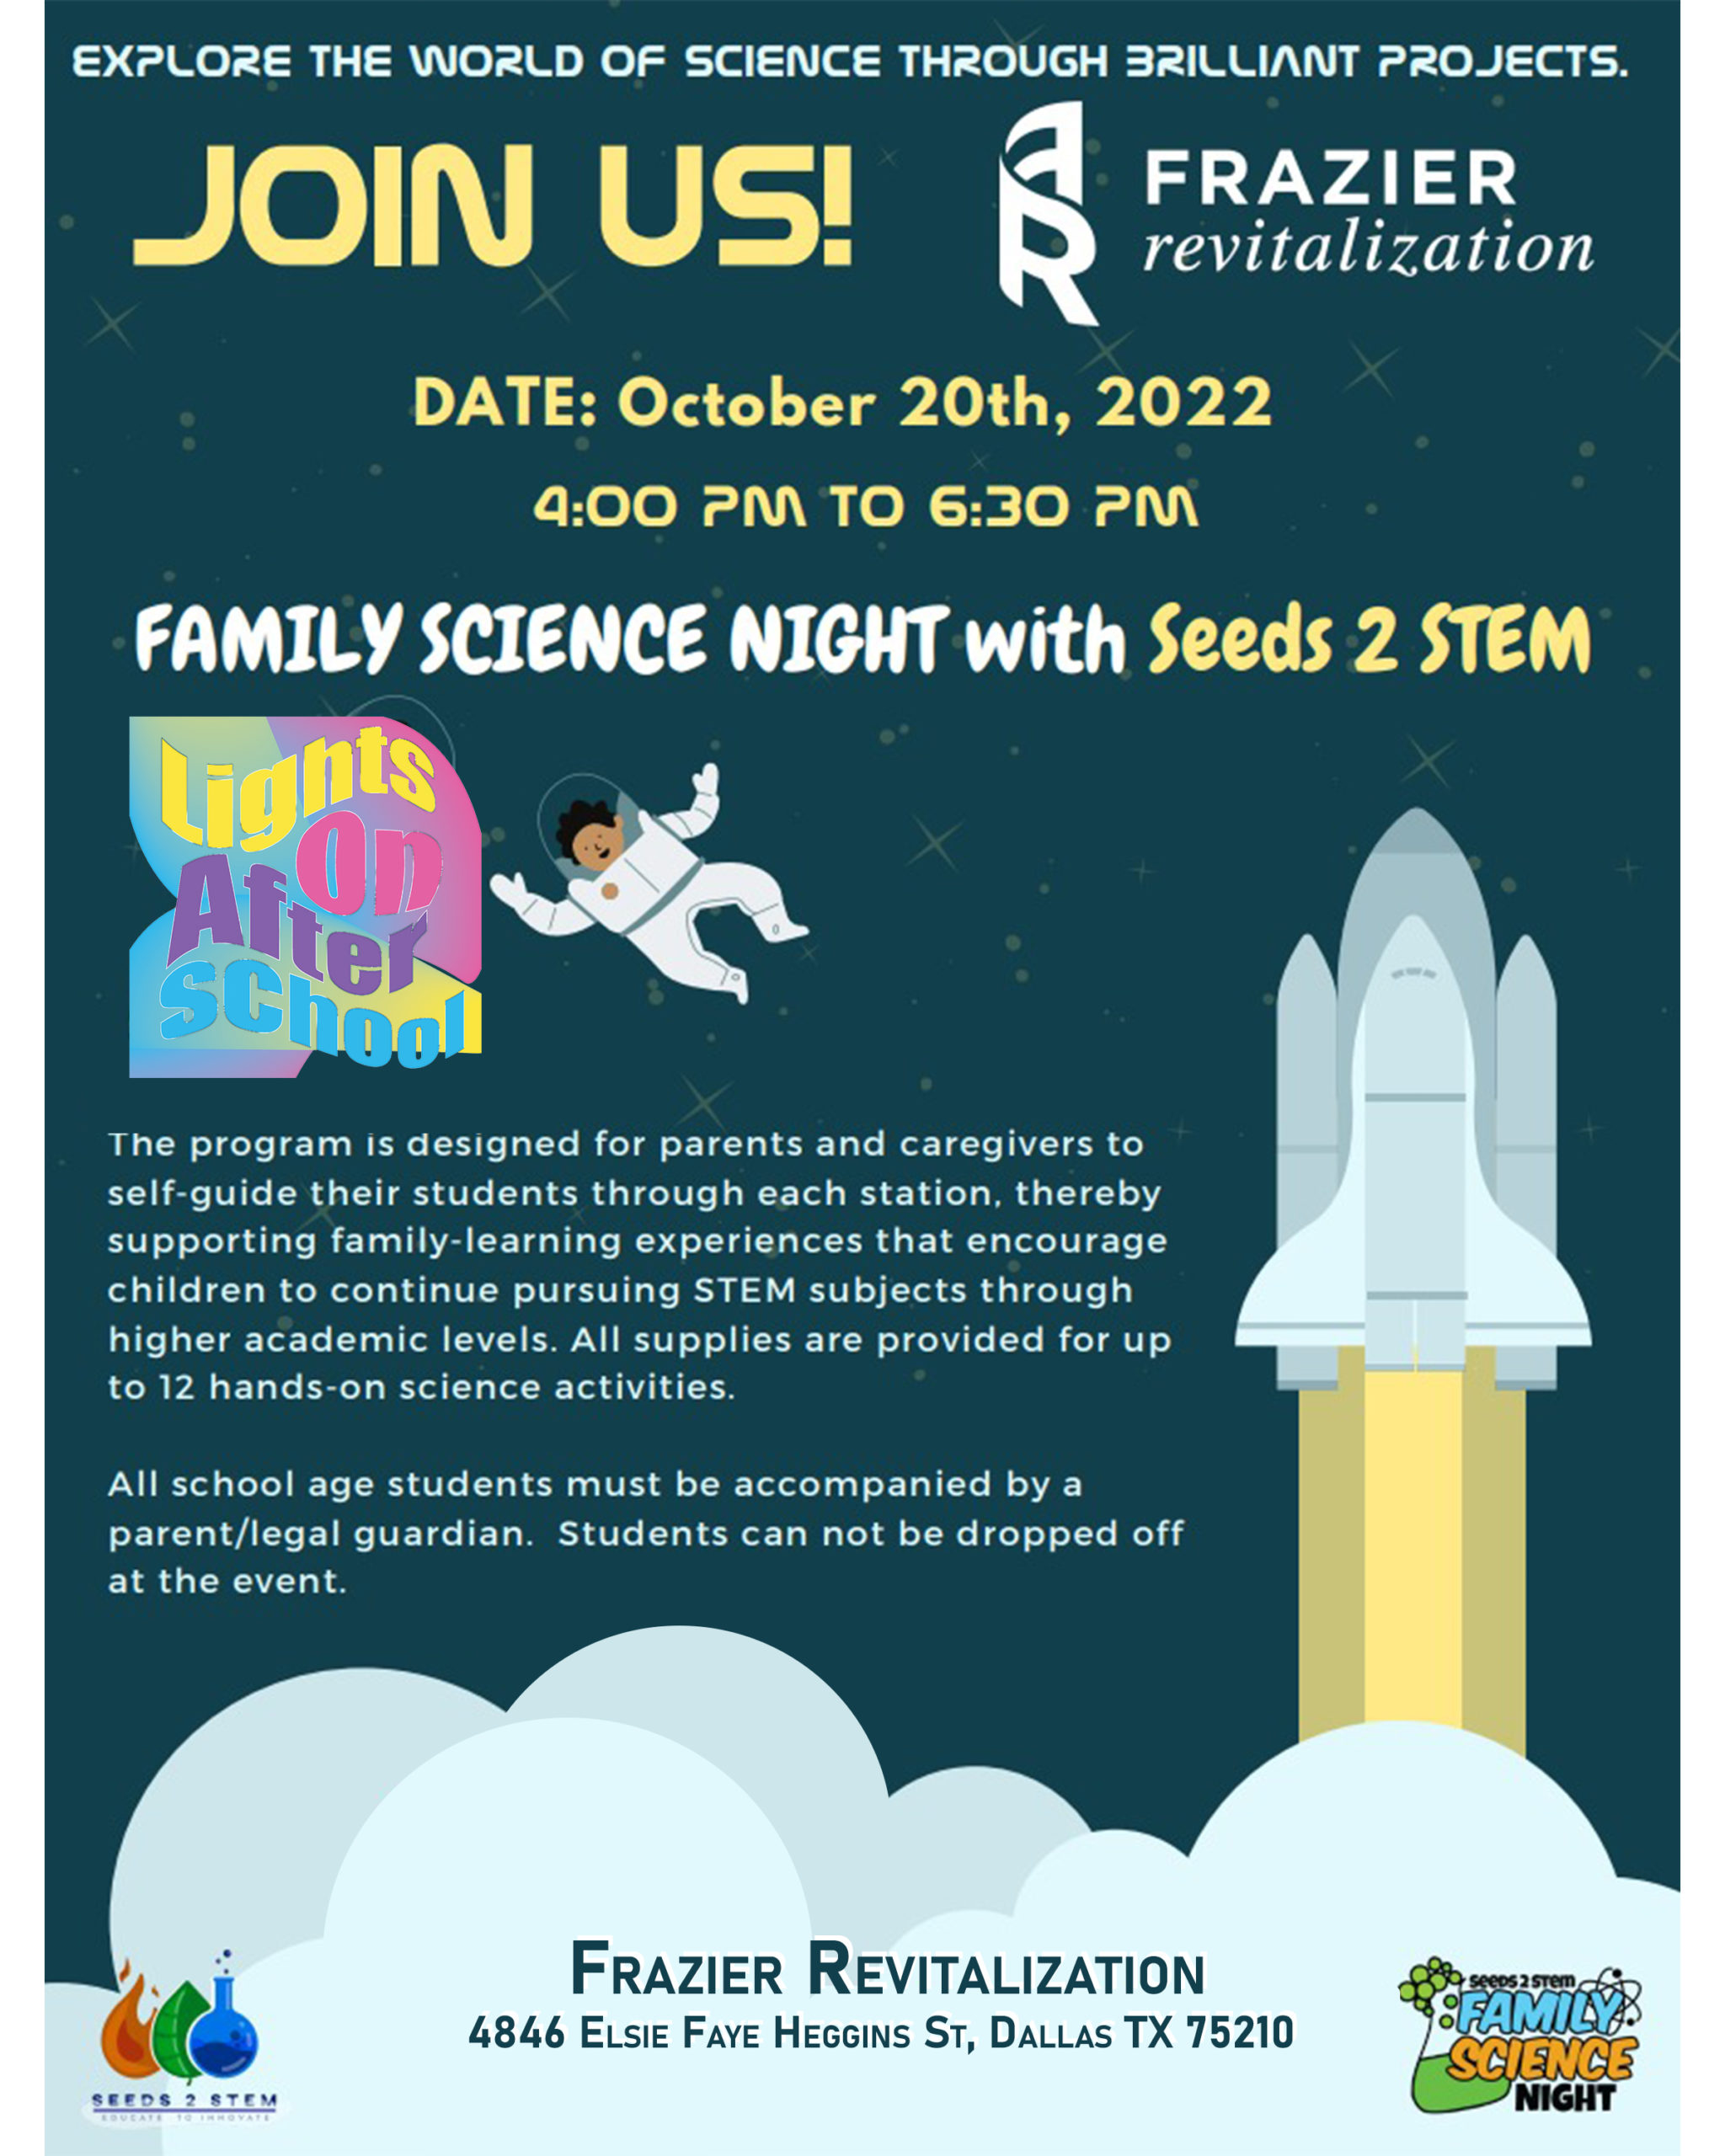 Family Science Night poster